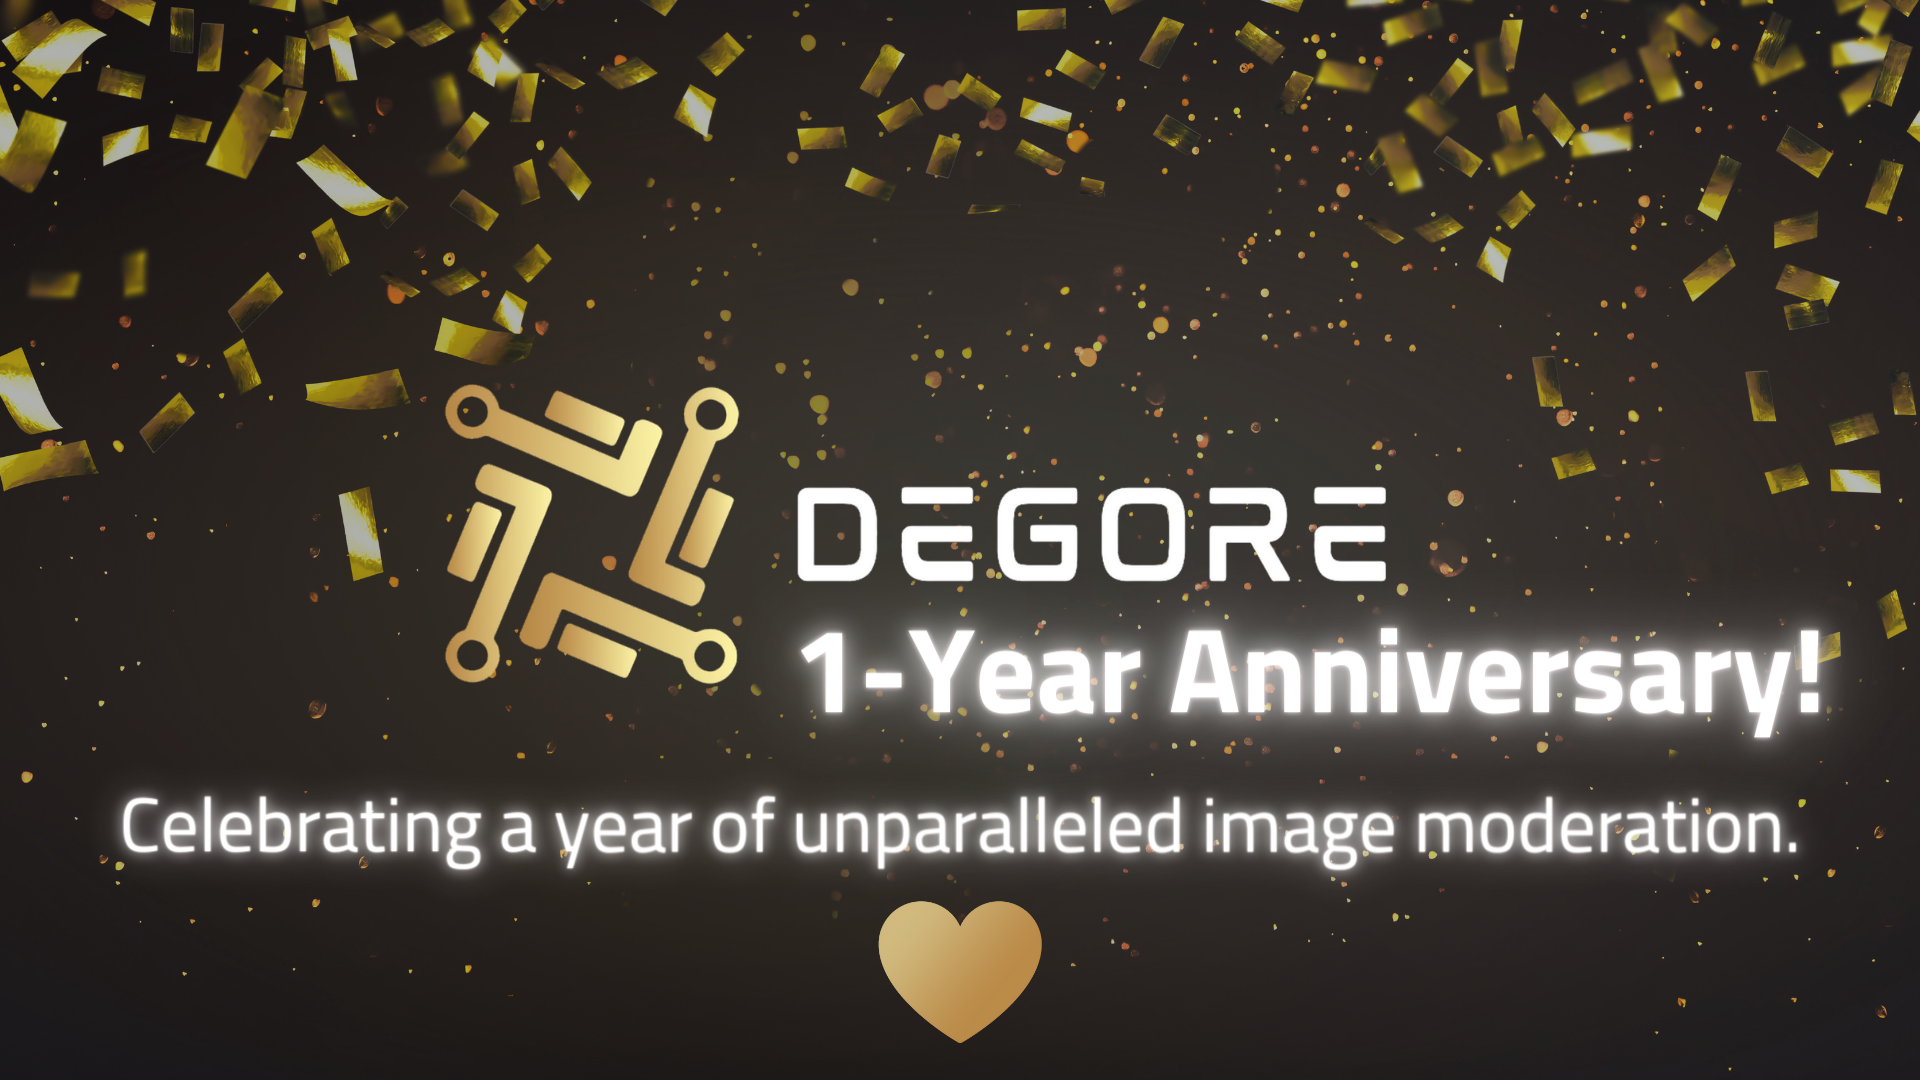 An image with the text "DeGore's 1-Year Anniversary! Celebrating a year of unparalleled image moderation."